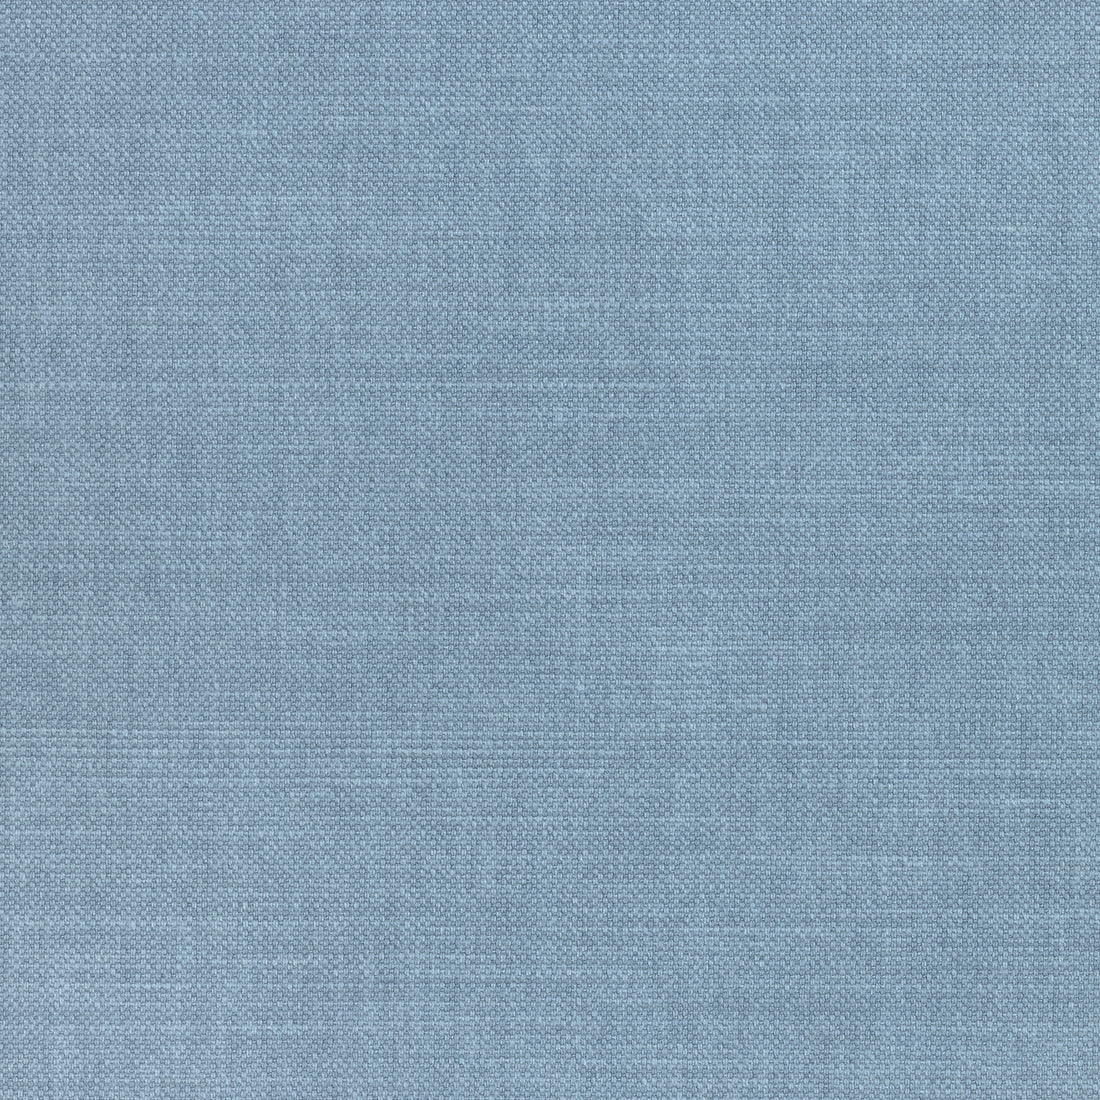 Prisma fabric in denim color - pattern number W70158 - by Thibaut in the Woven Resource Vol 12 Prisma Fabrics collection